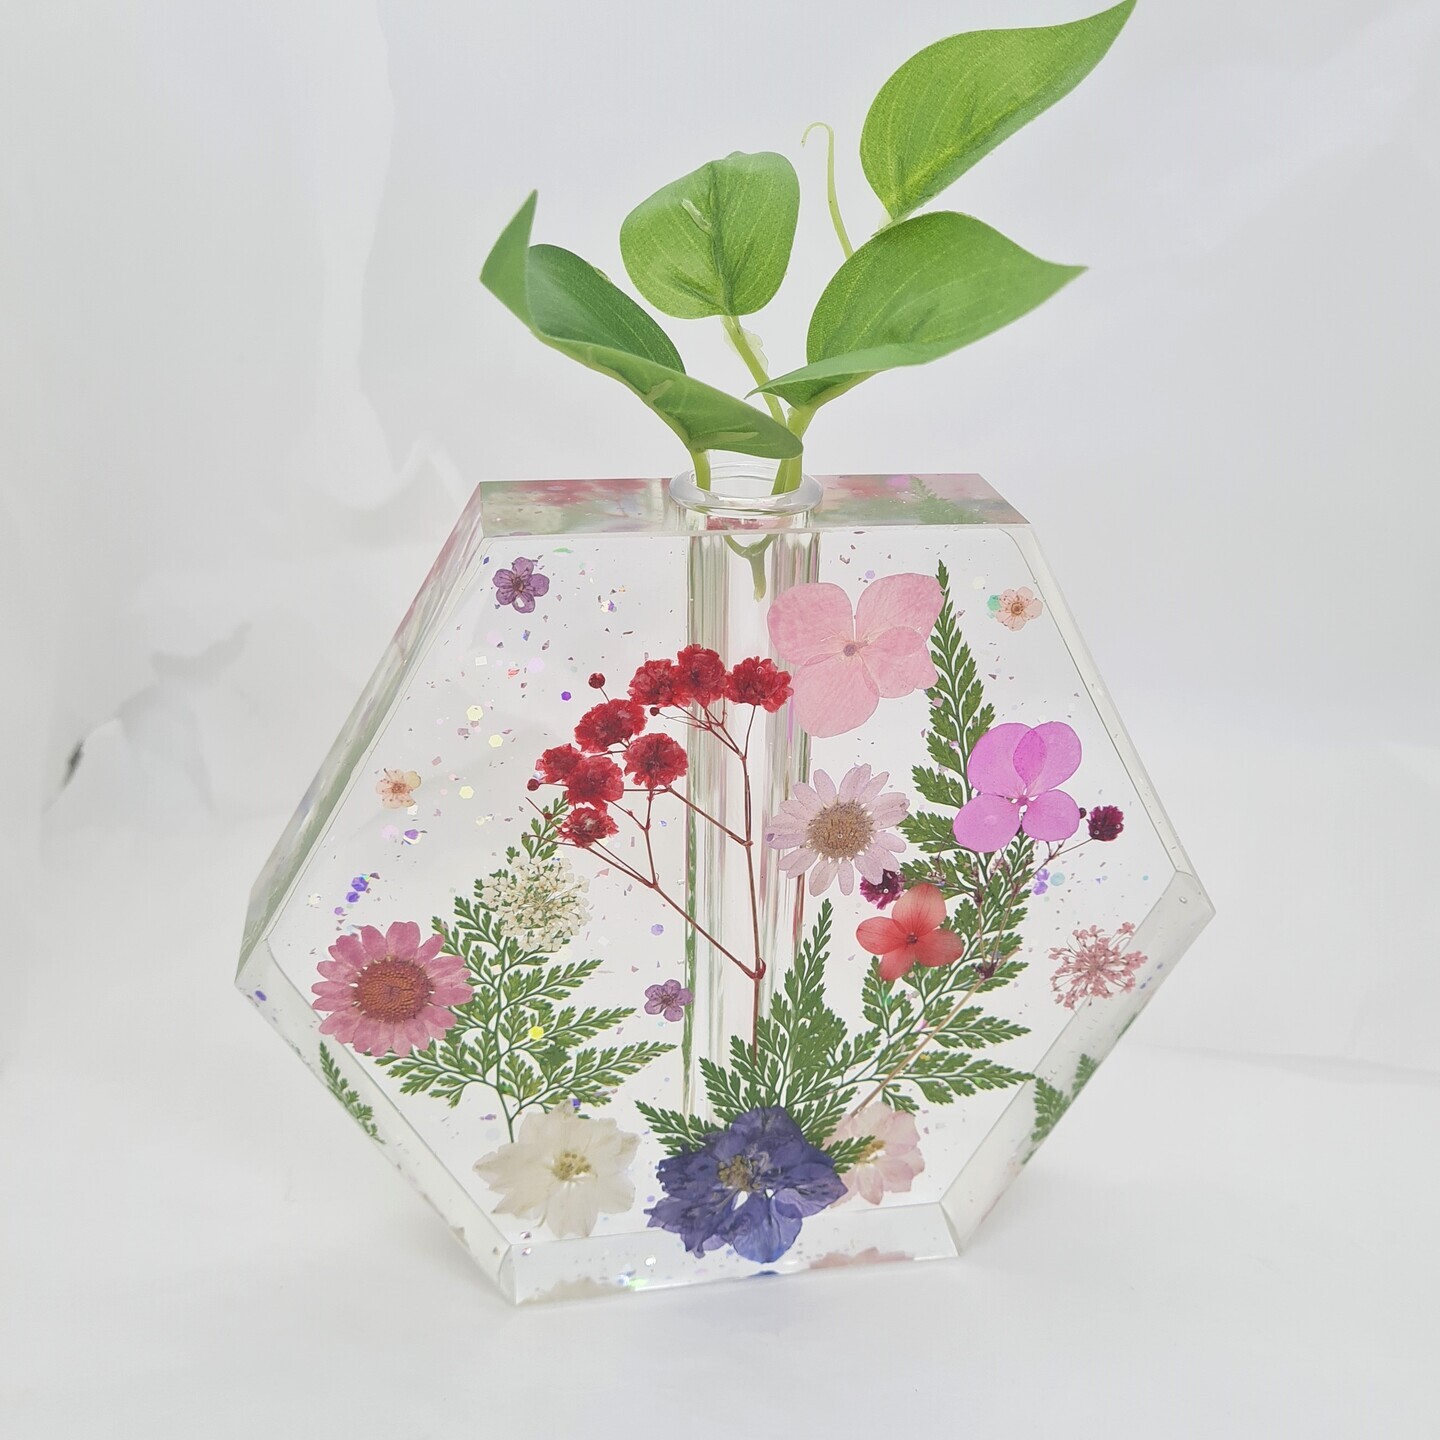 Resin vase with real flowers & leaves  Hexagon  Handmade by special needs artisan